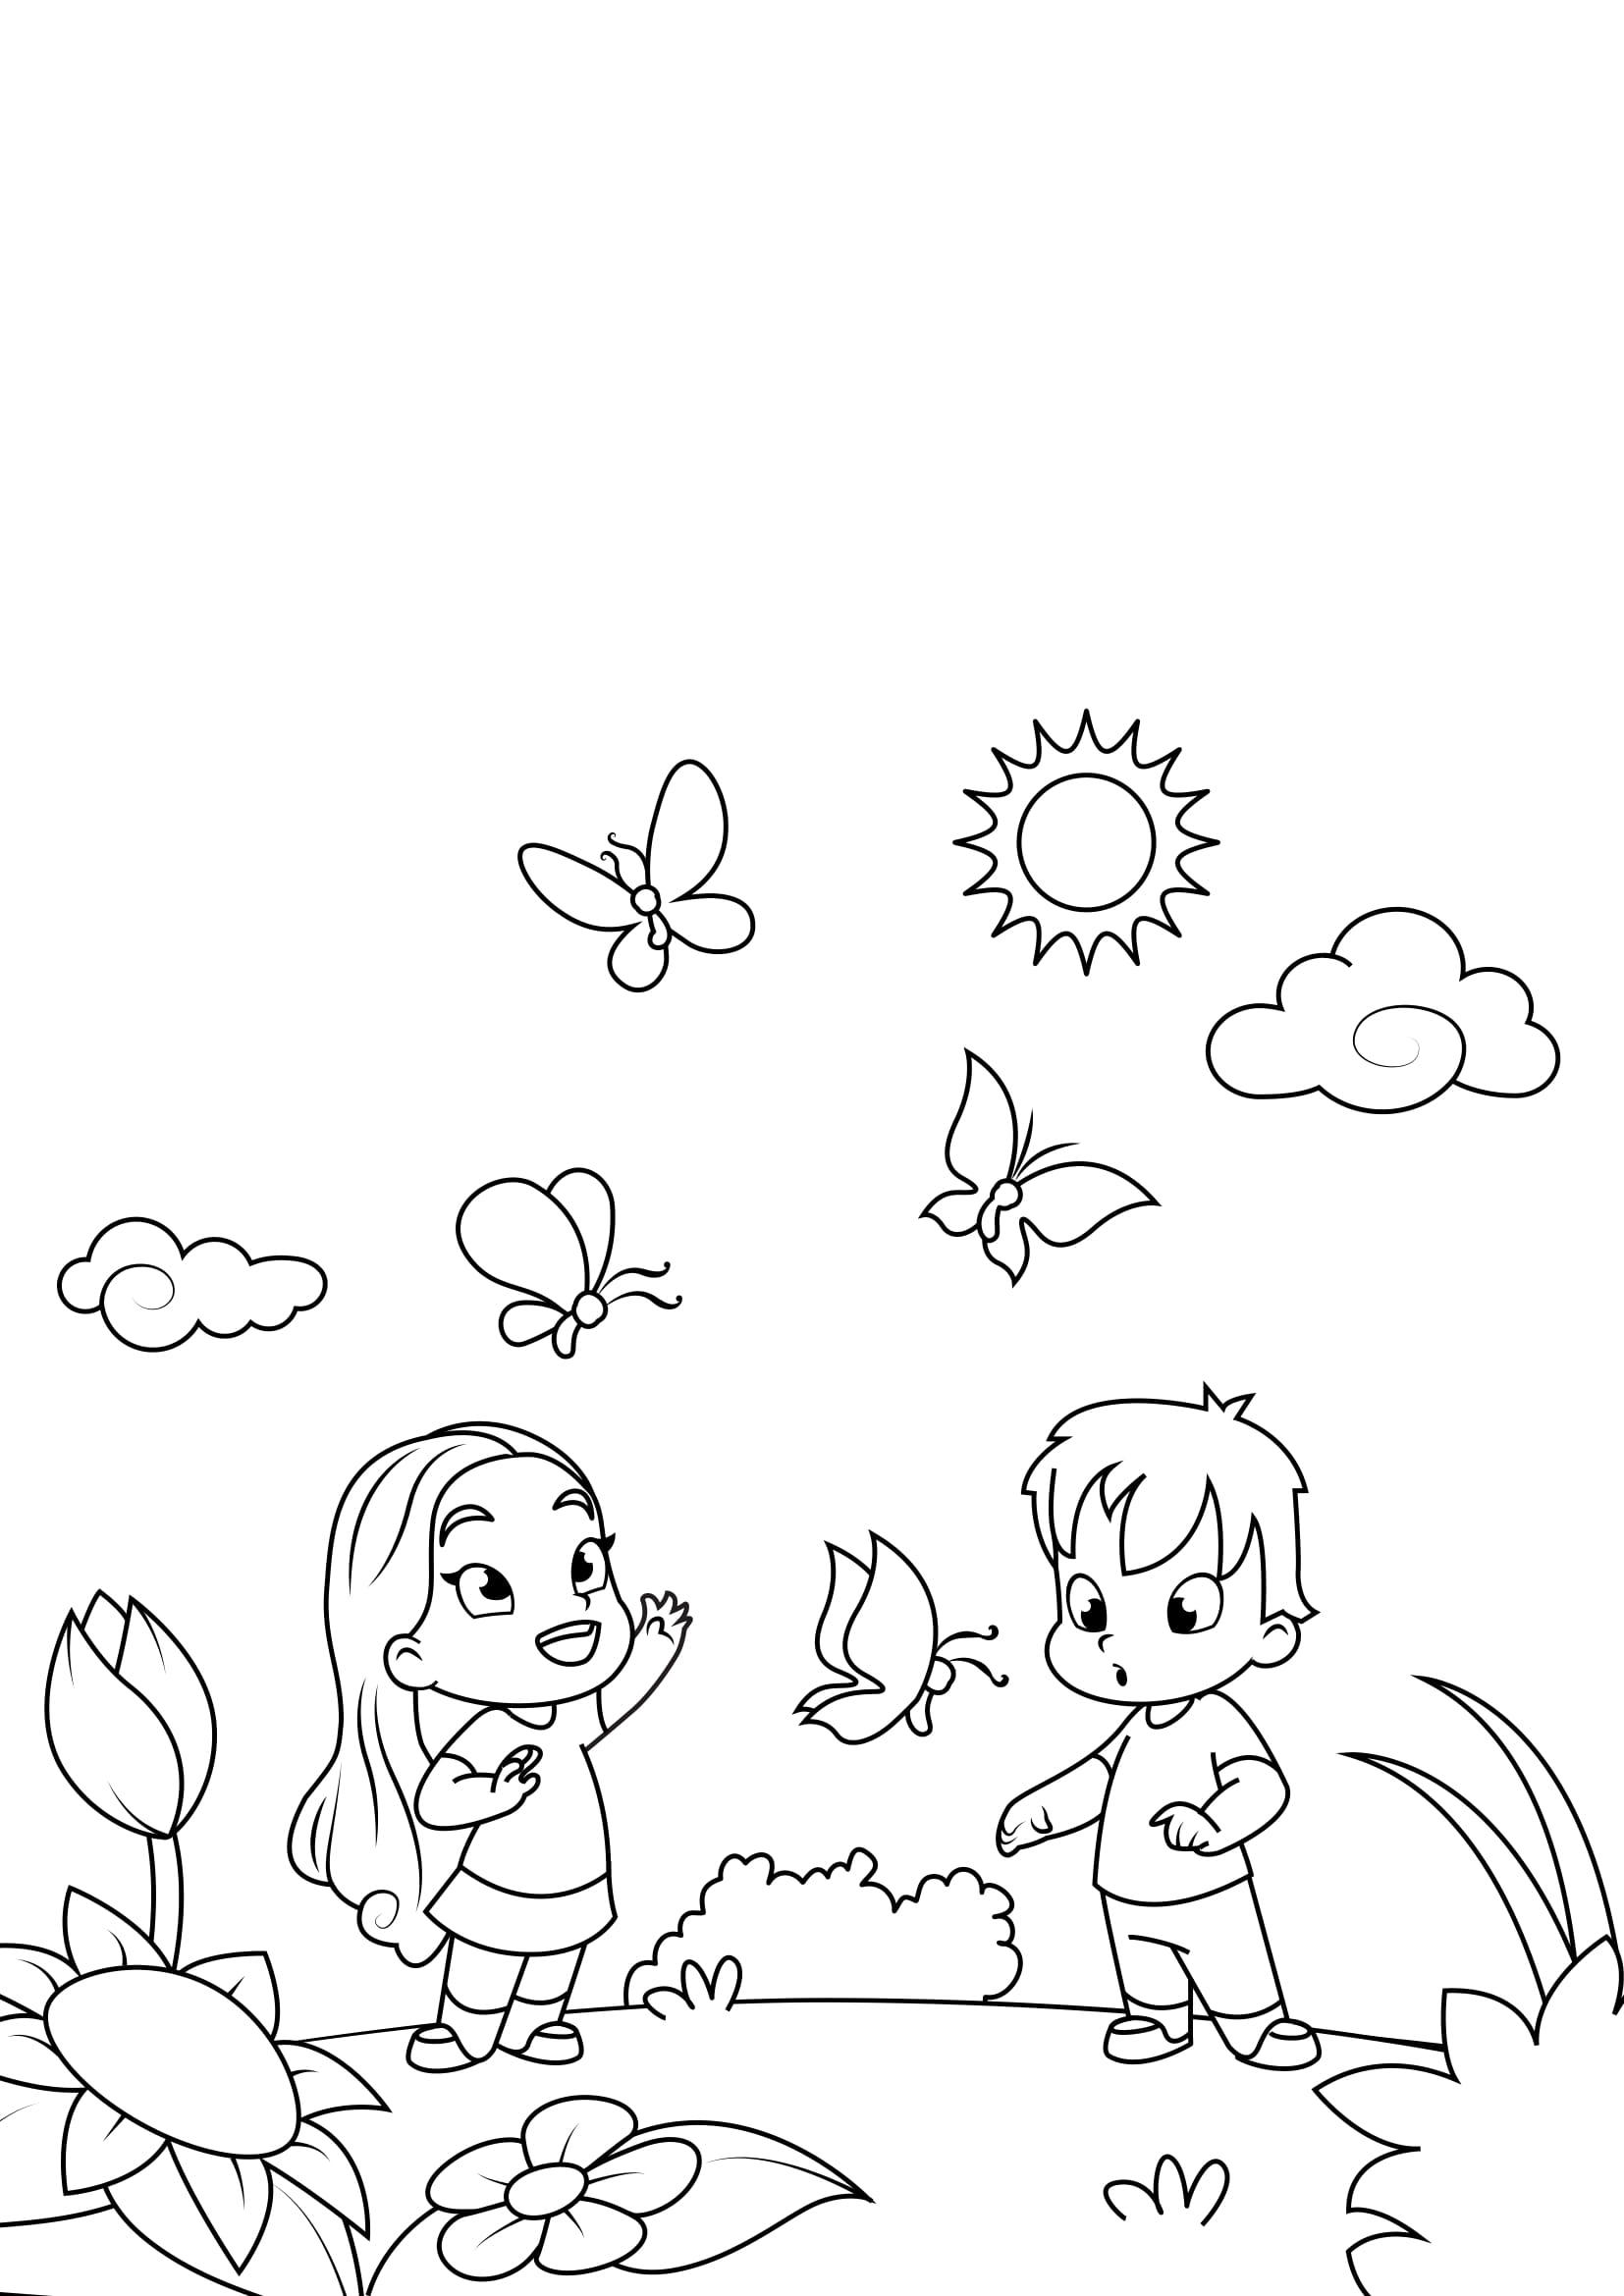 Coloring page spring summer is ing